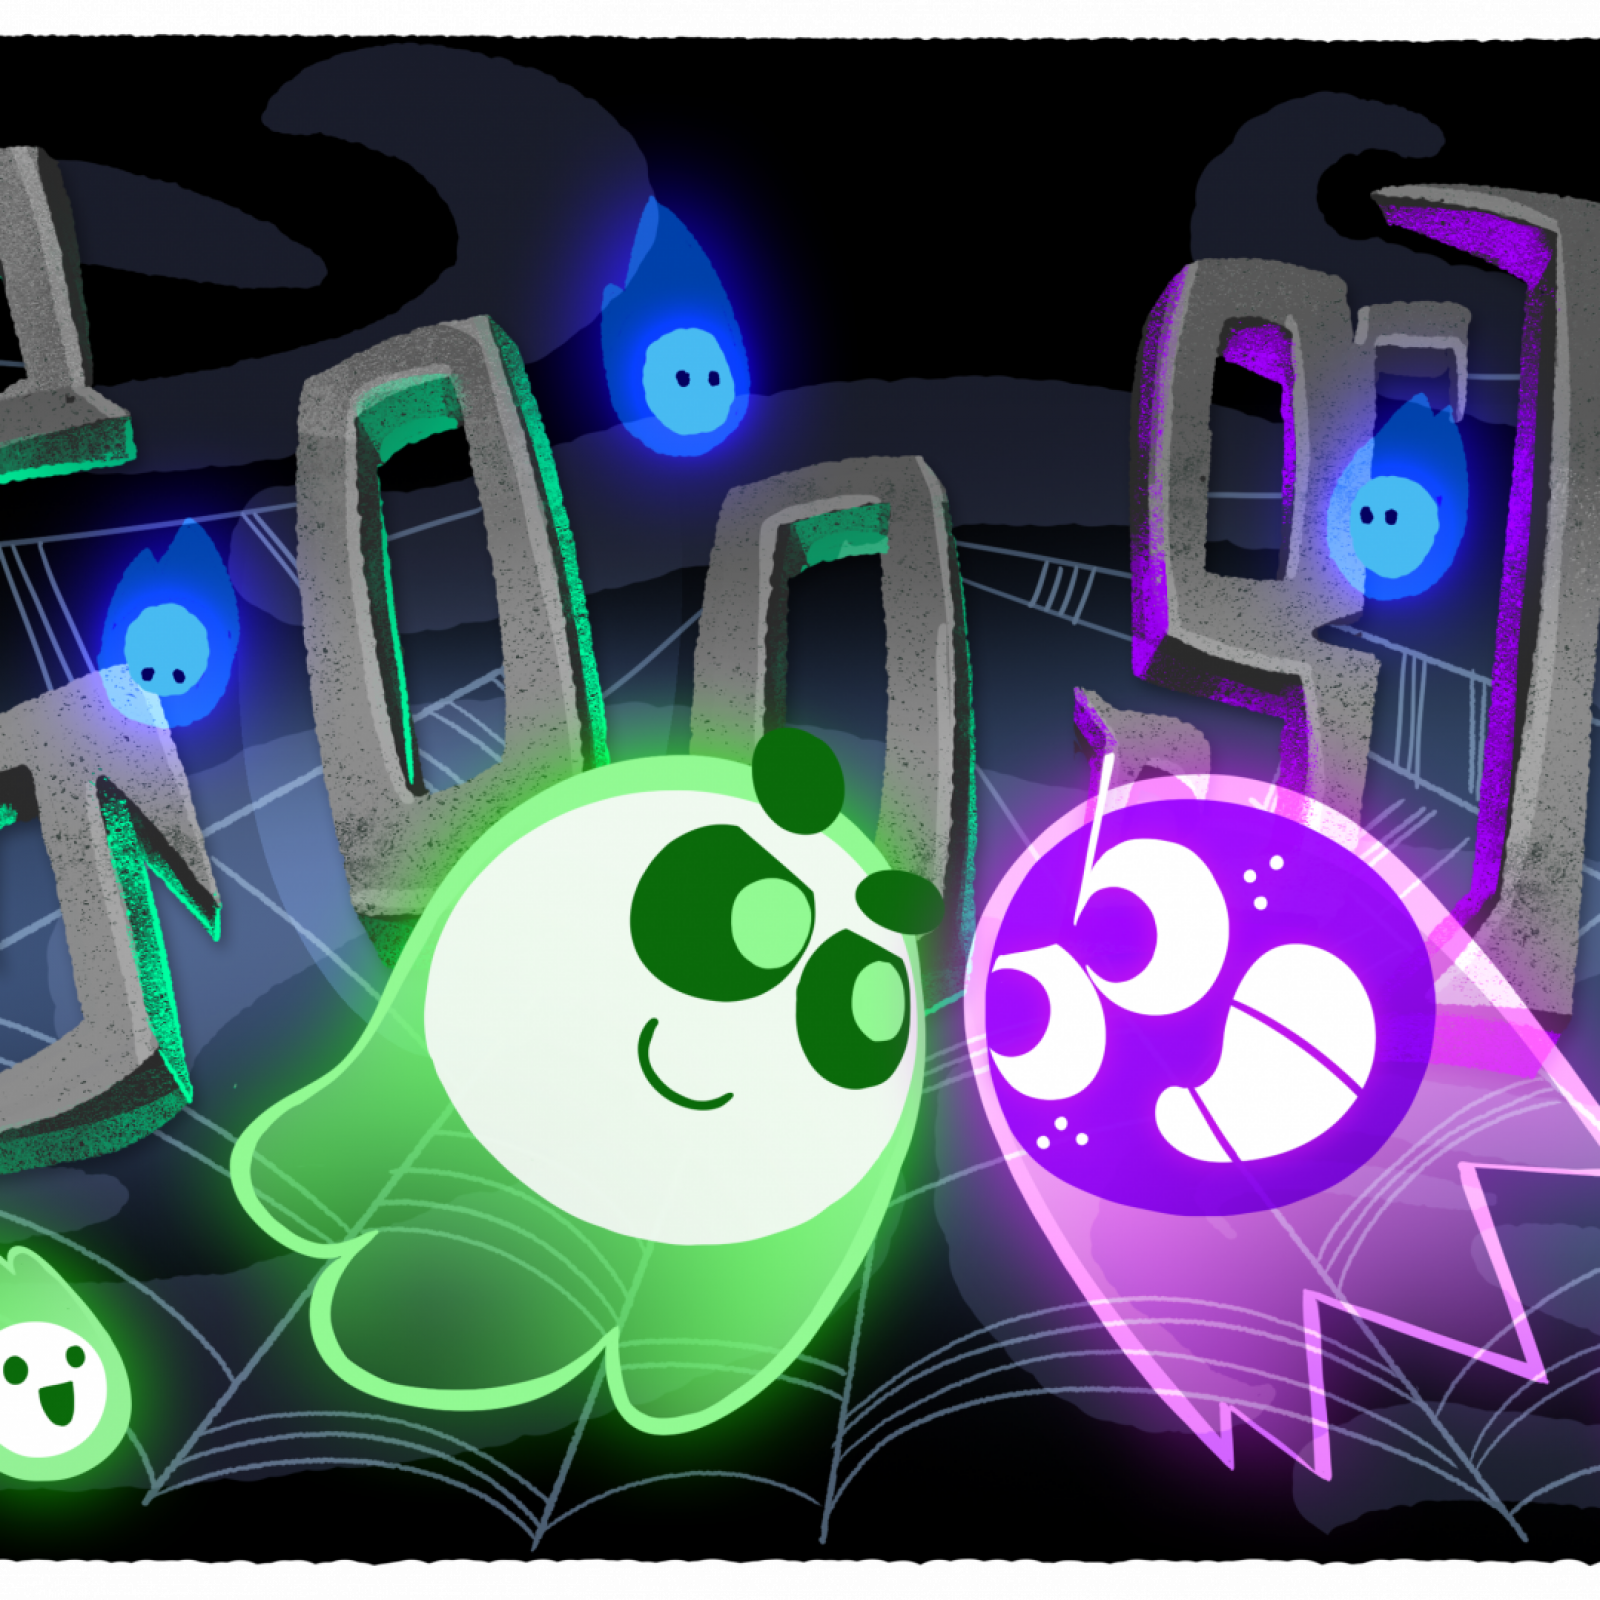 Today's Google Doodle is a Halloween-themed multiplayer game. Come play  with us